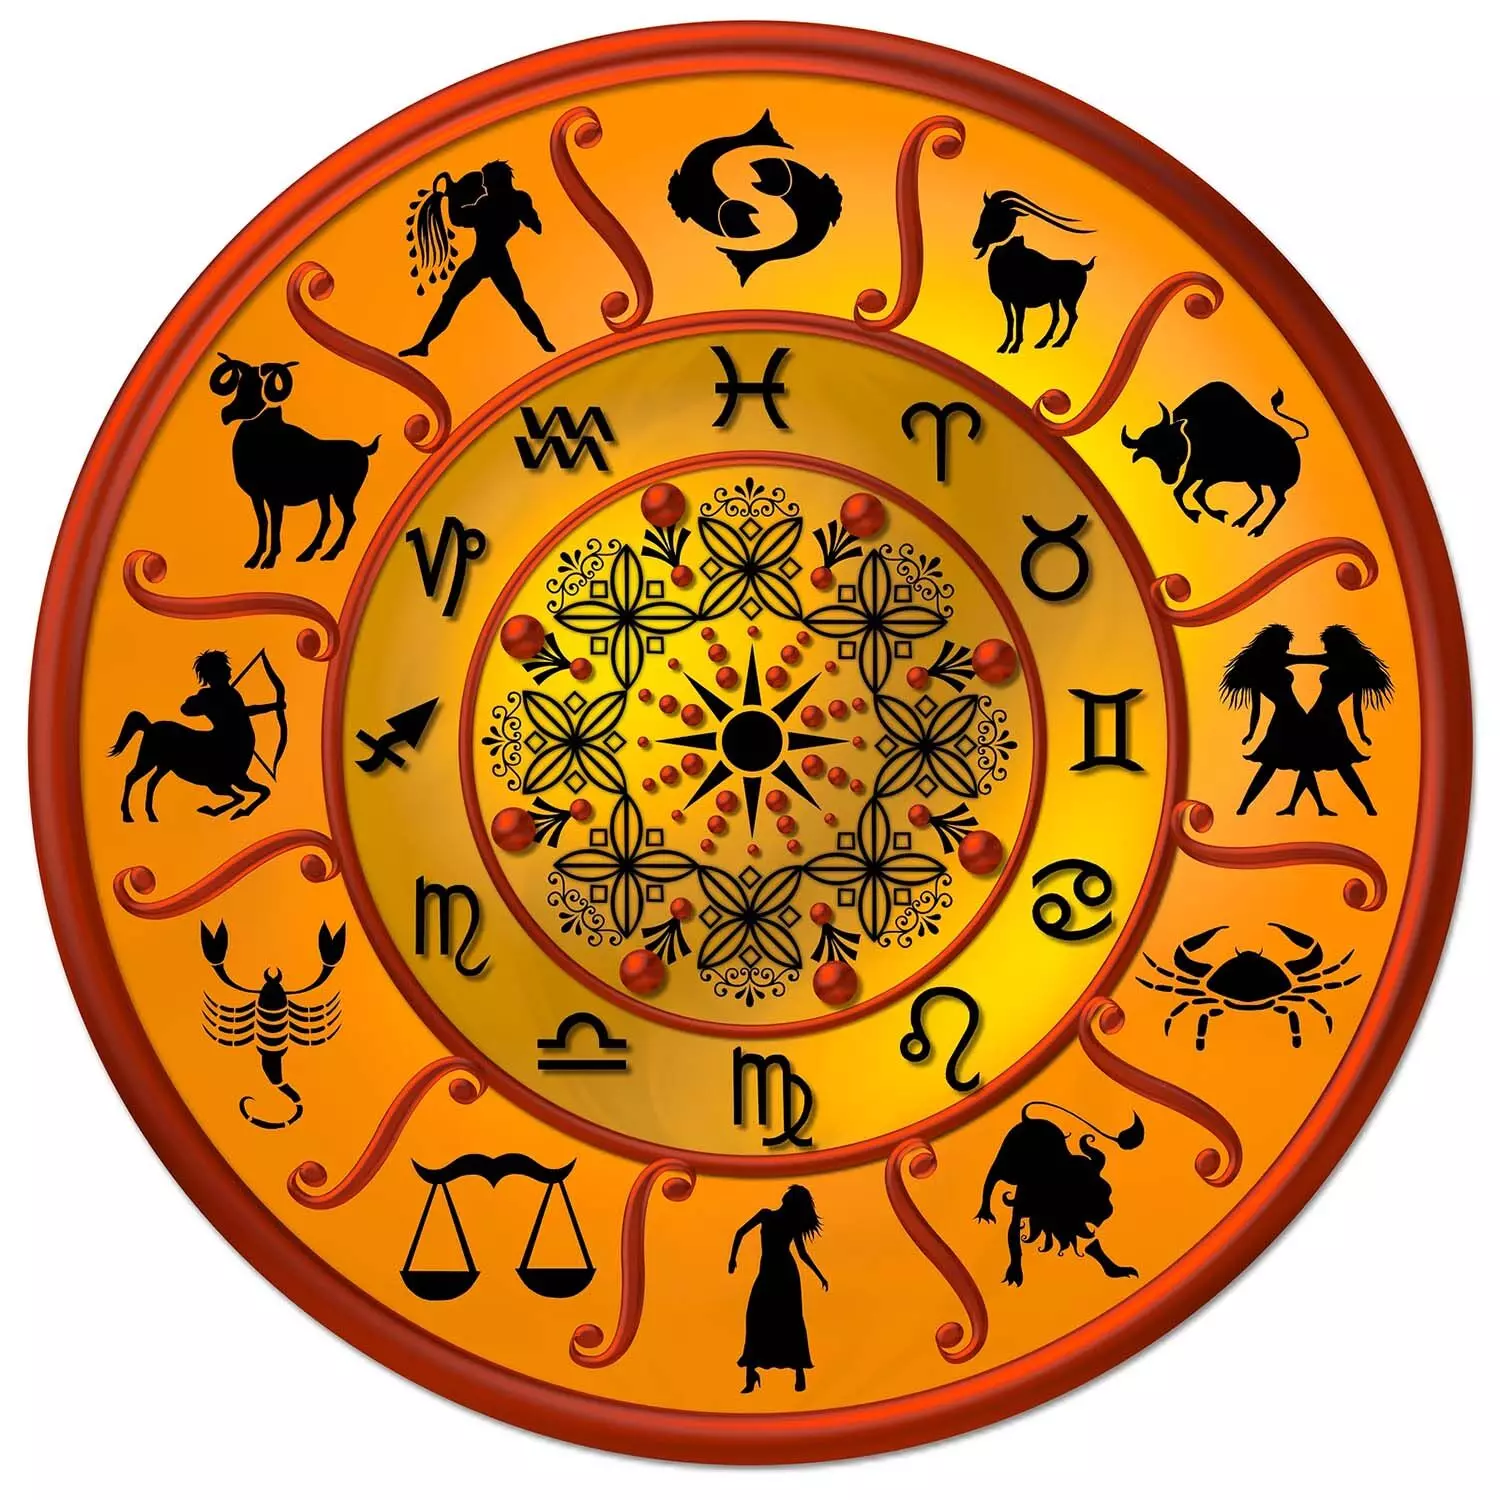 27 June – Know your todays horoscope